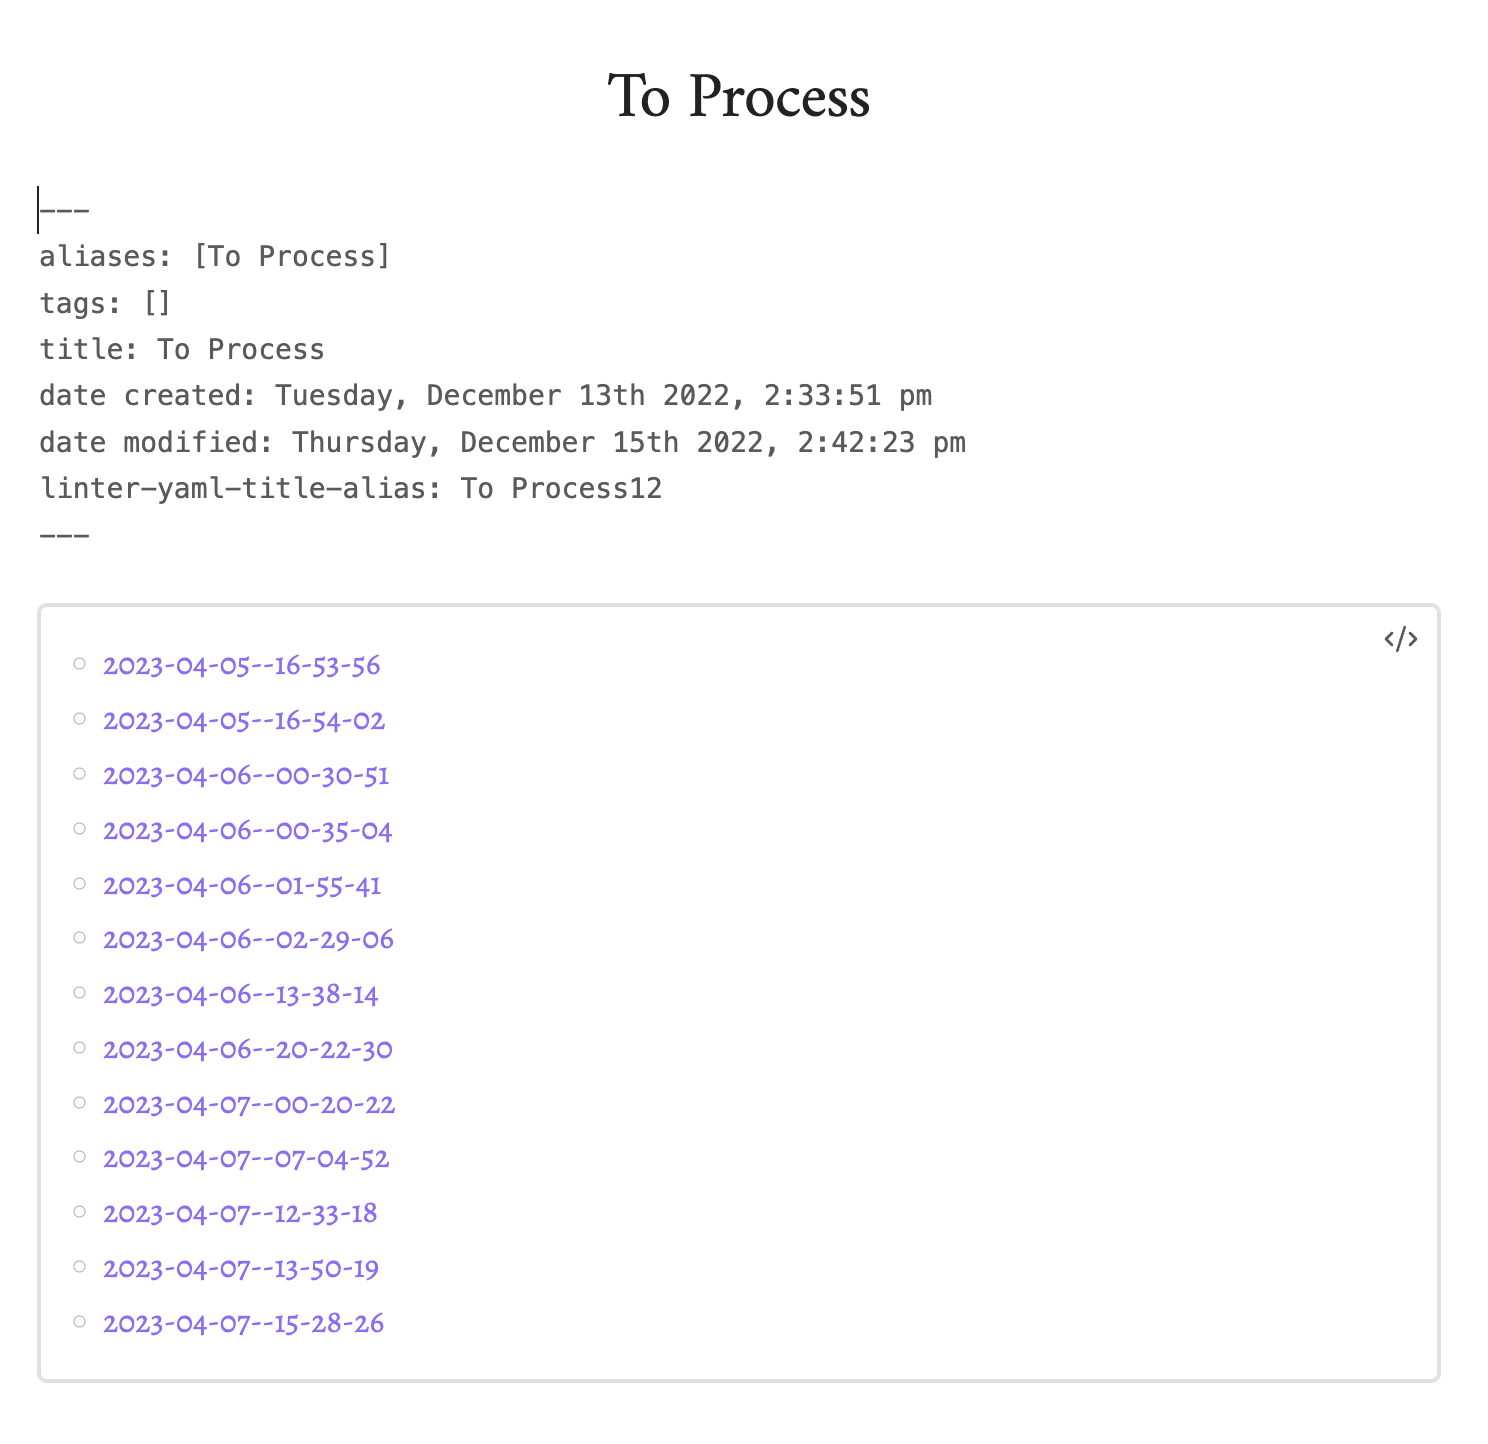 https://bram-adams.ghost.io/content/images/2023/04/to-process-in-obsidian-example.png